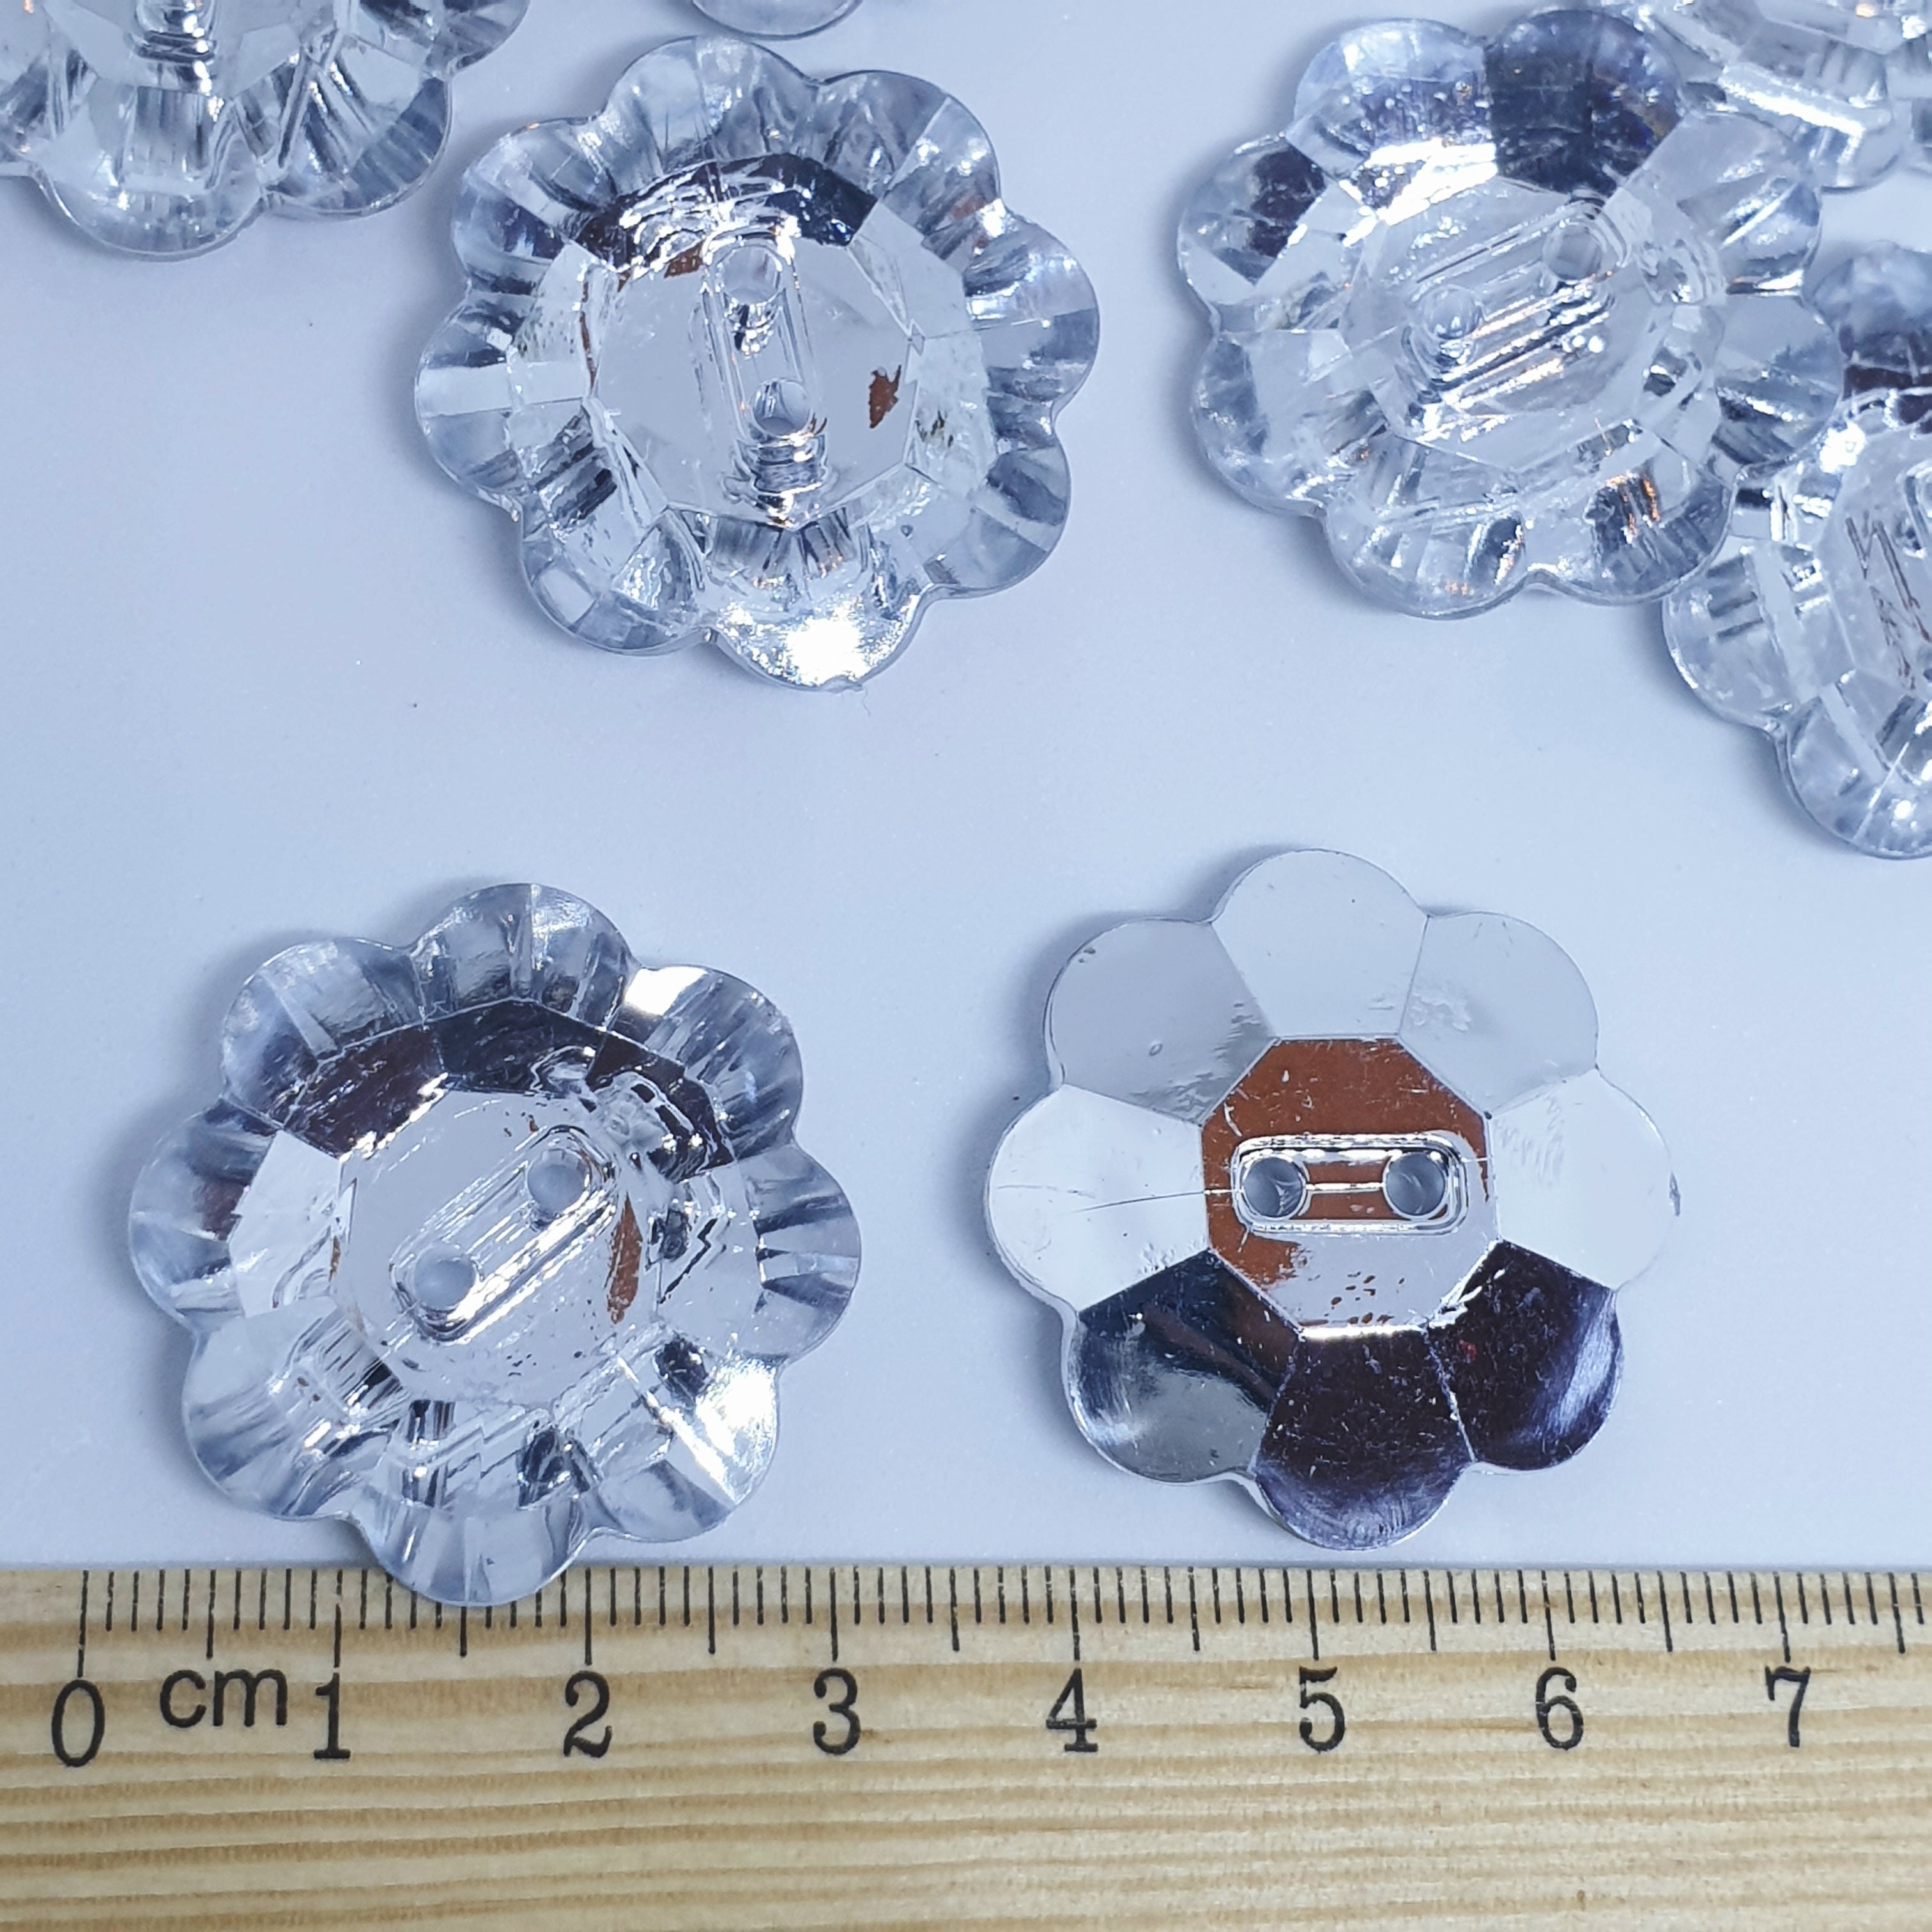 MajorCrafts 8pcs 30mm Crystal Clear 2 Holes Acrylic Flower Large Sewing Buttons